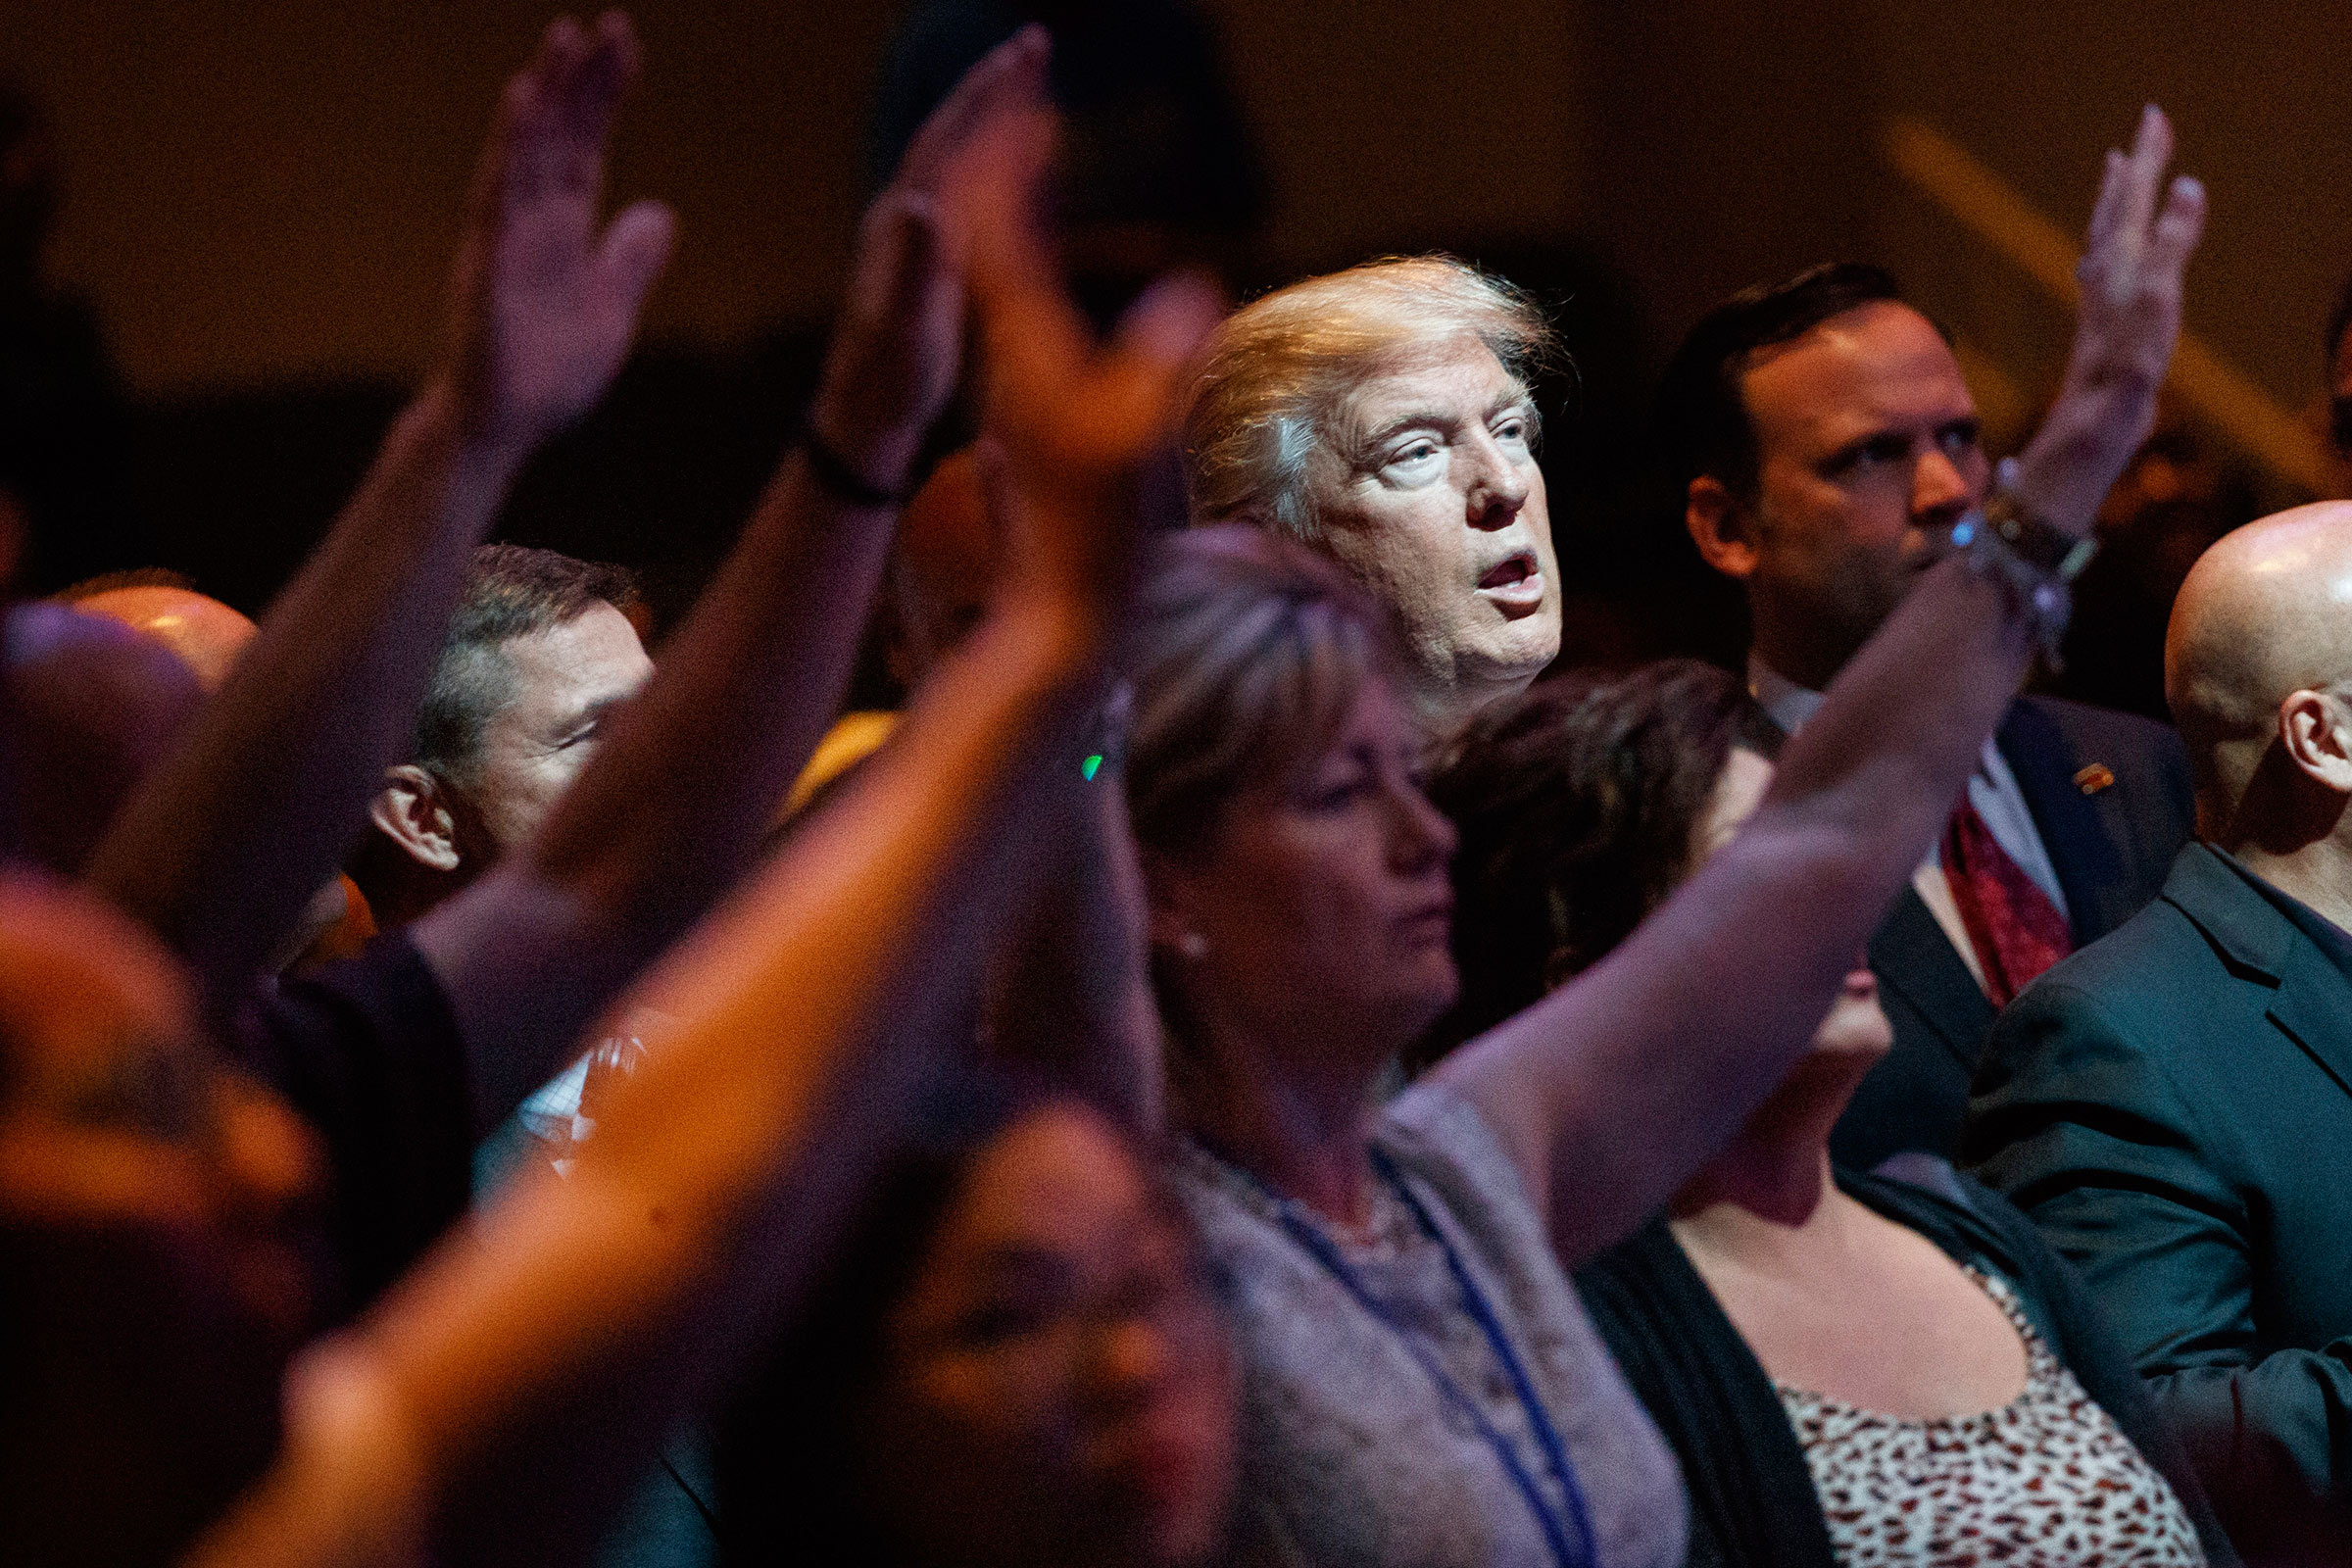 Then-candidate Trump at a 2016 service at the International Church of Las Vegas.